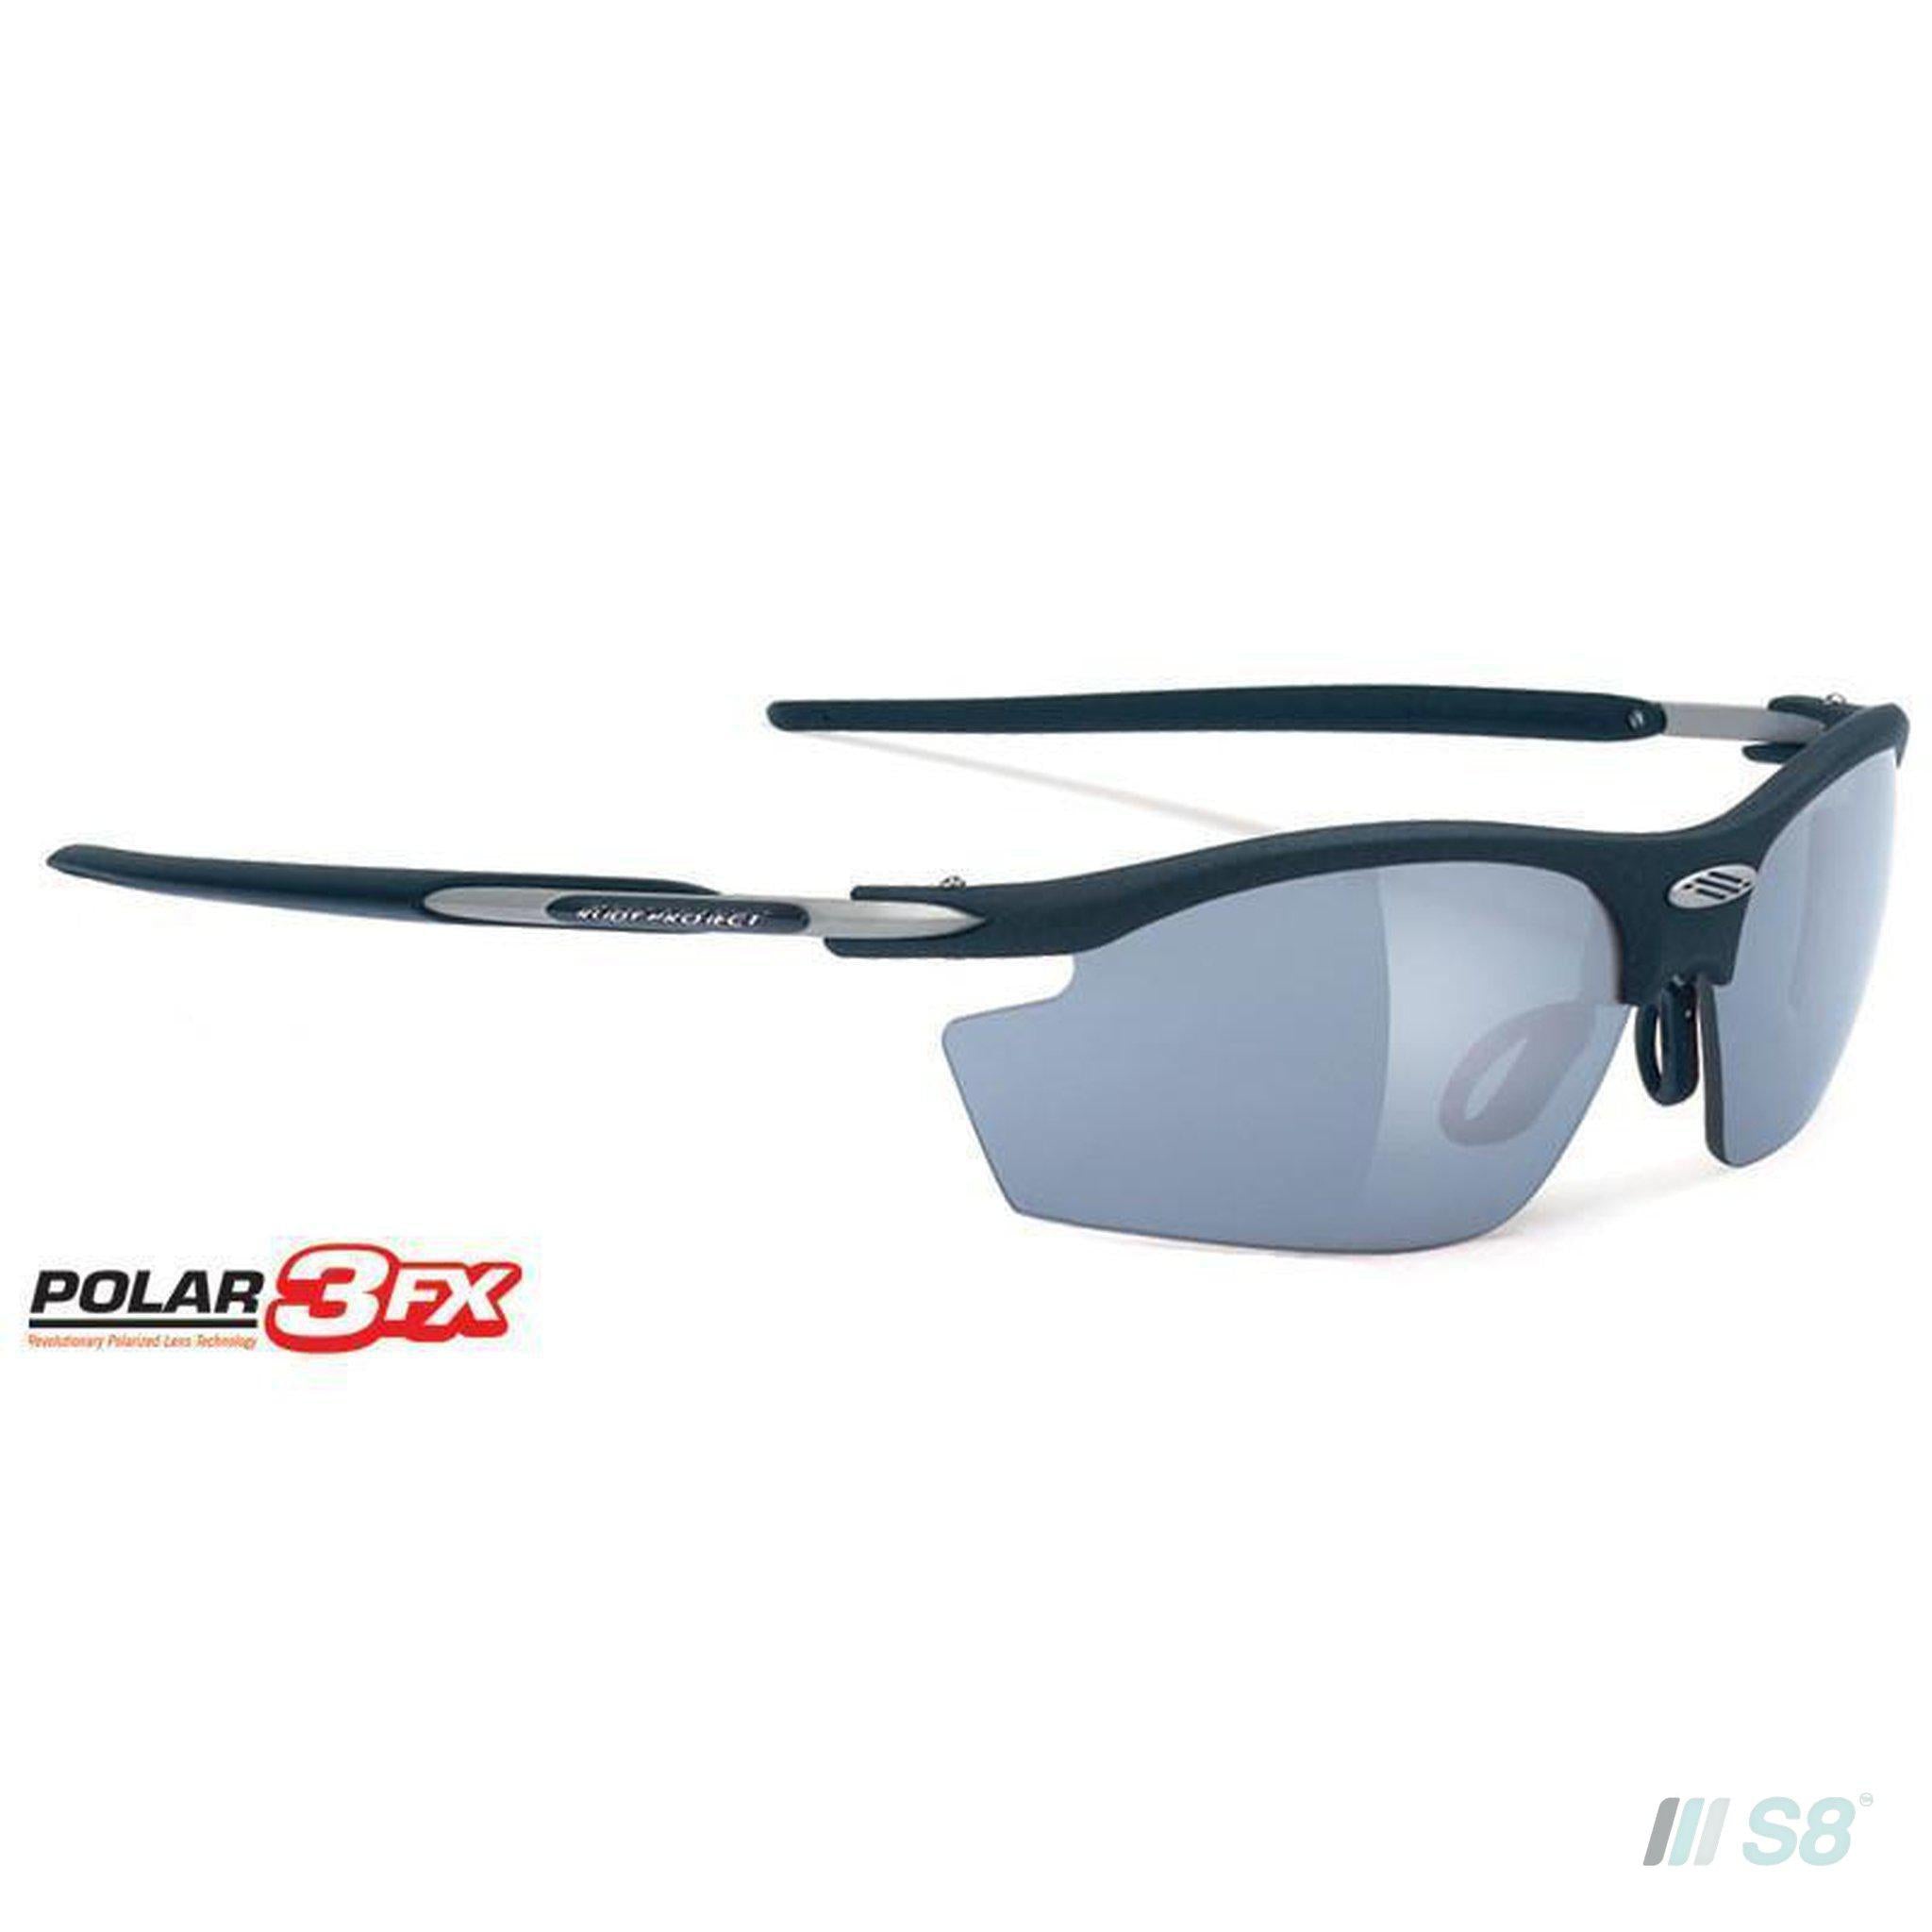 Rudy Project - Rydon Sunglasses / Matte Black / Polarized 3FX Grey Lens-Rudy Project-S8 Products Group